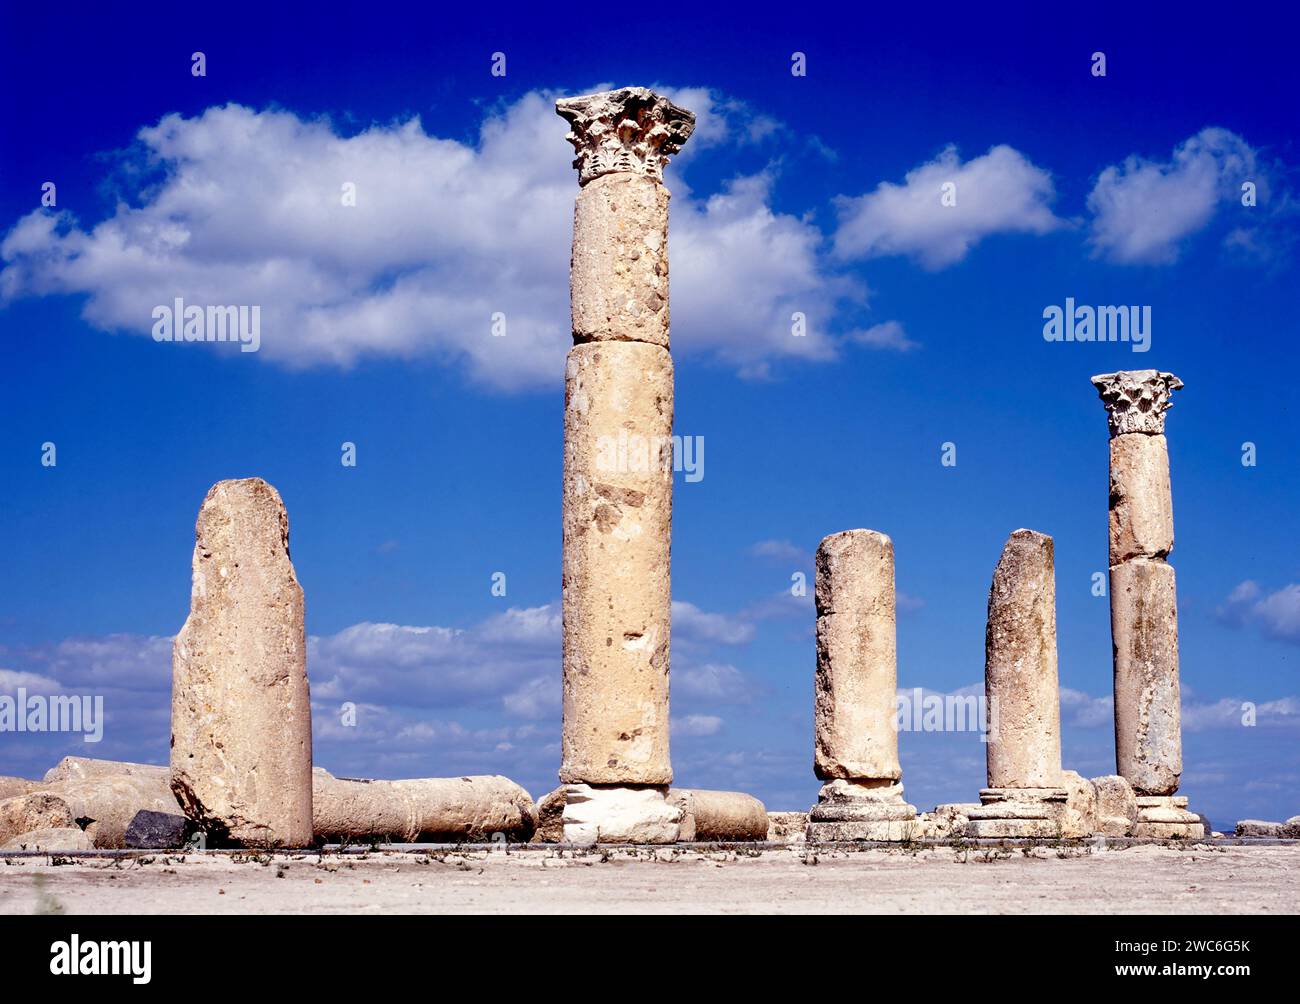 Ruins of the church at Umm Qais, situated 110 km (68 miles) north of Amman, Jordan, on a broad promontory 378 meters above sea level Stock Photo